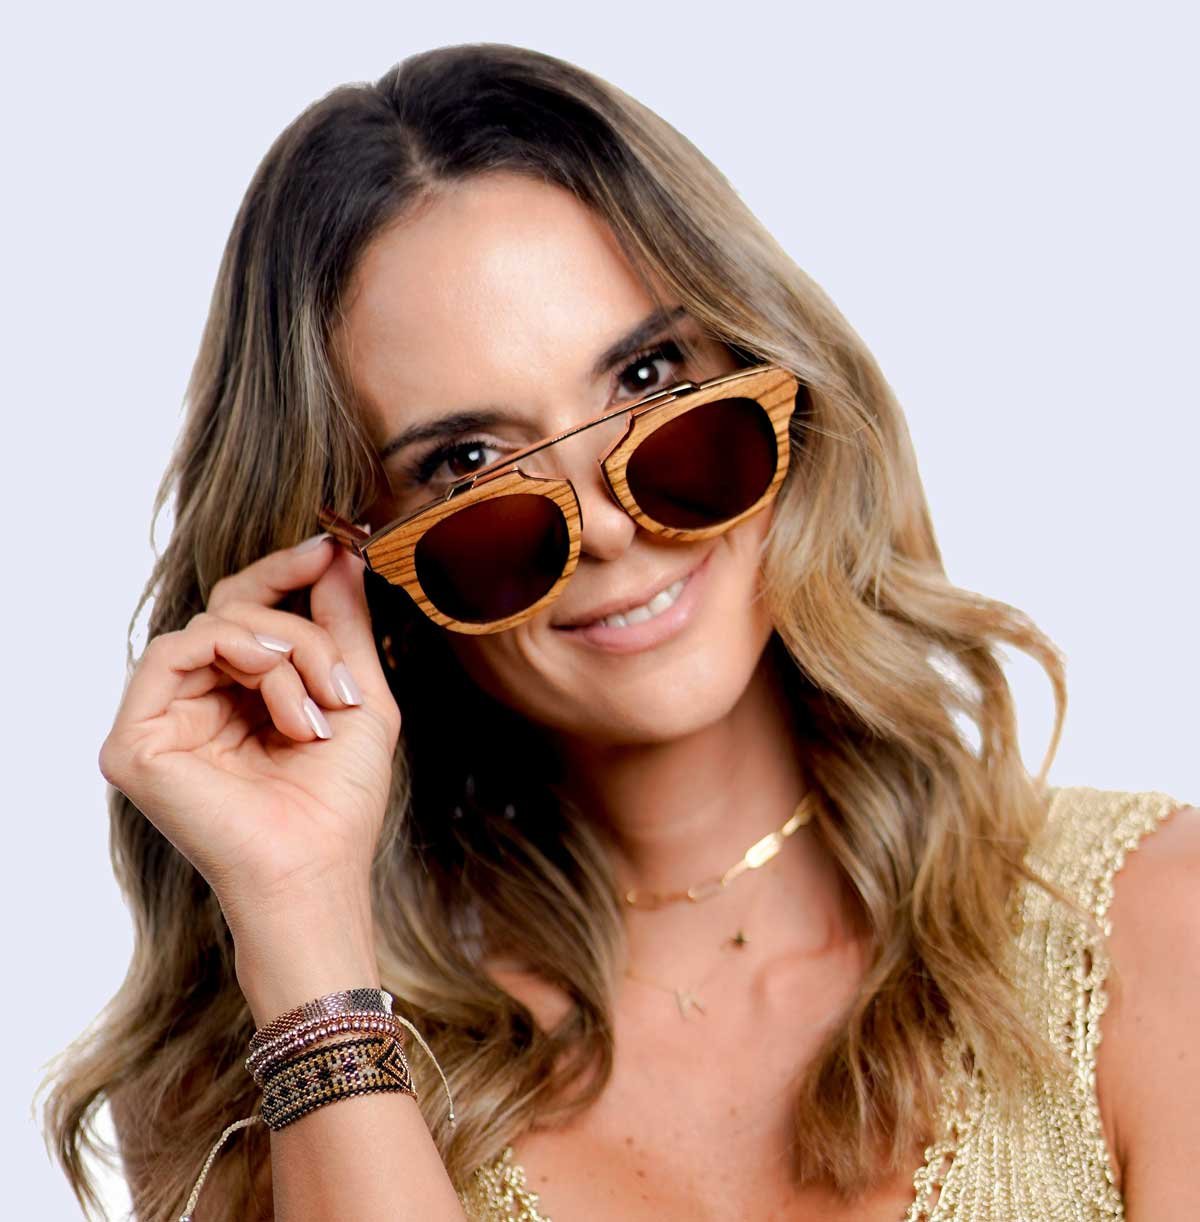 Wooden sunglasses as a natural trend